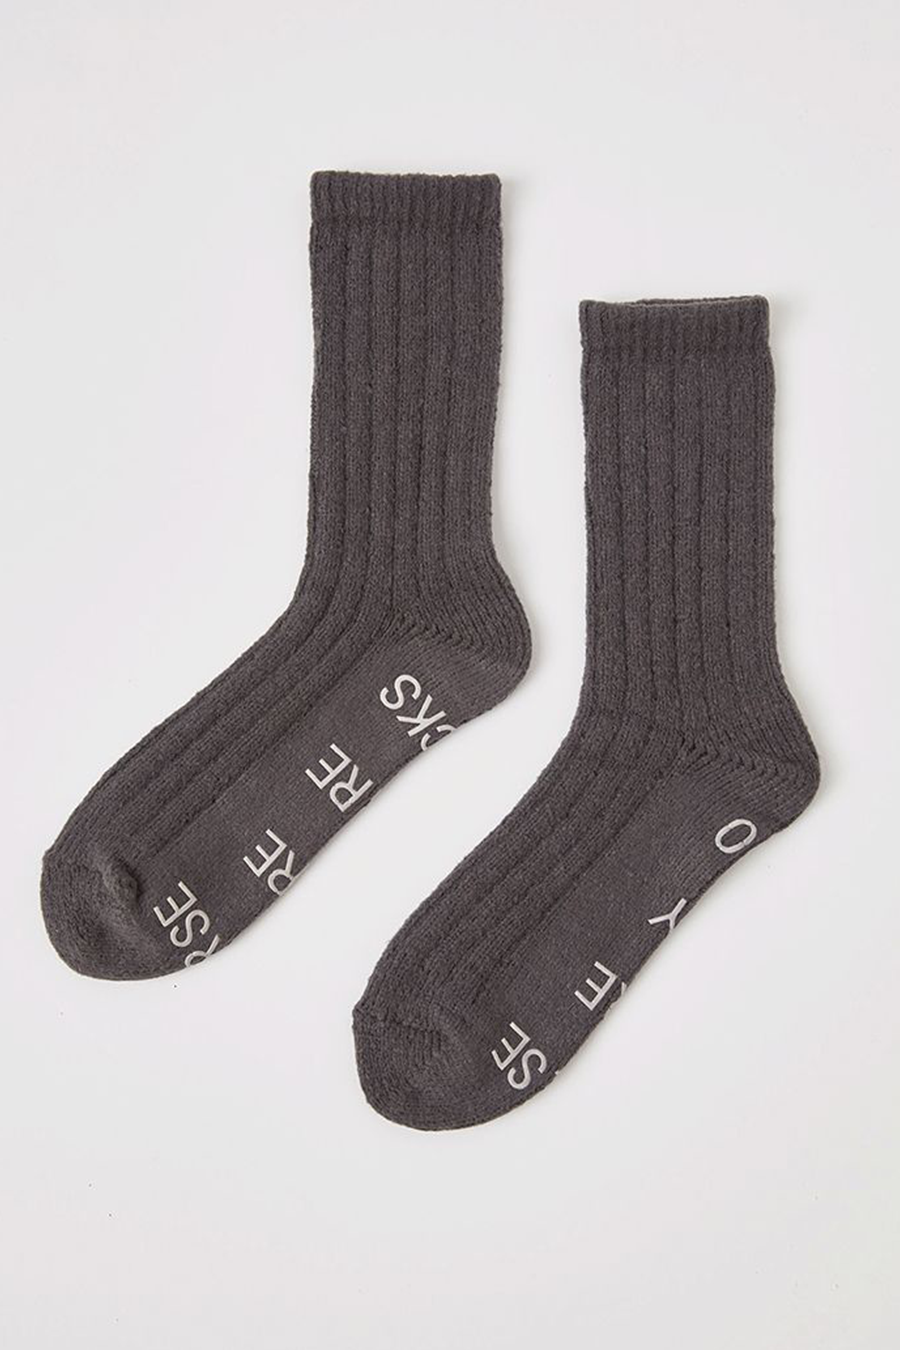 Too Tired Rib Socks | Pewter - Main Image Number 2 of 2